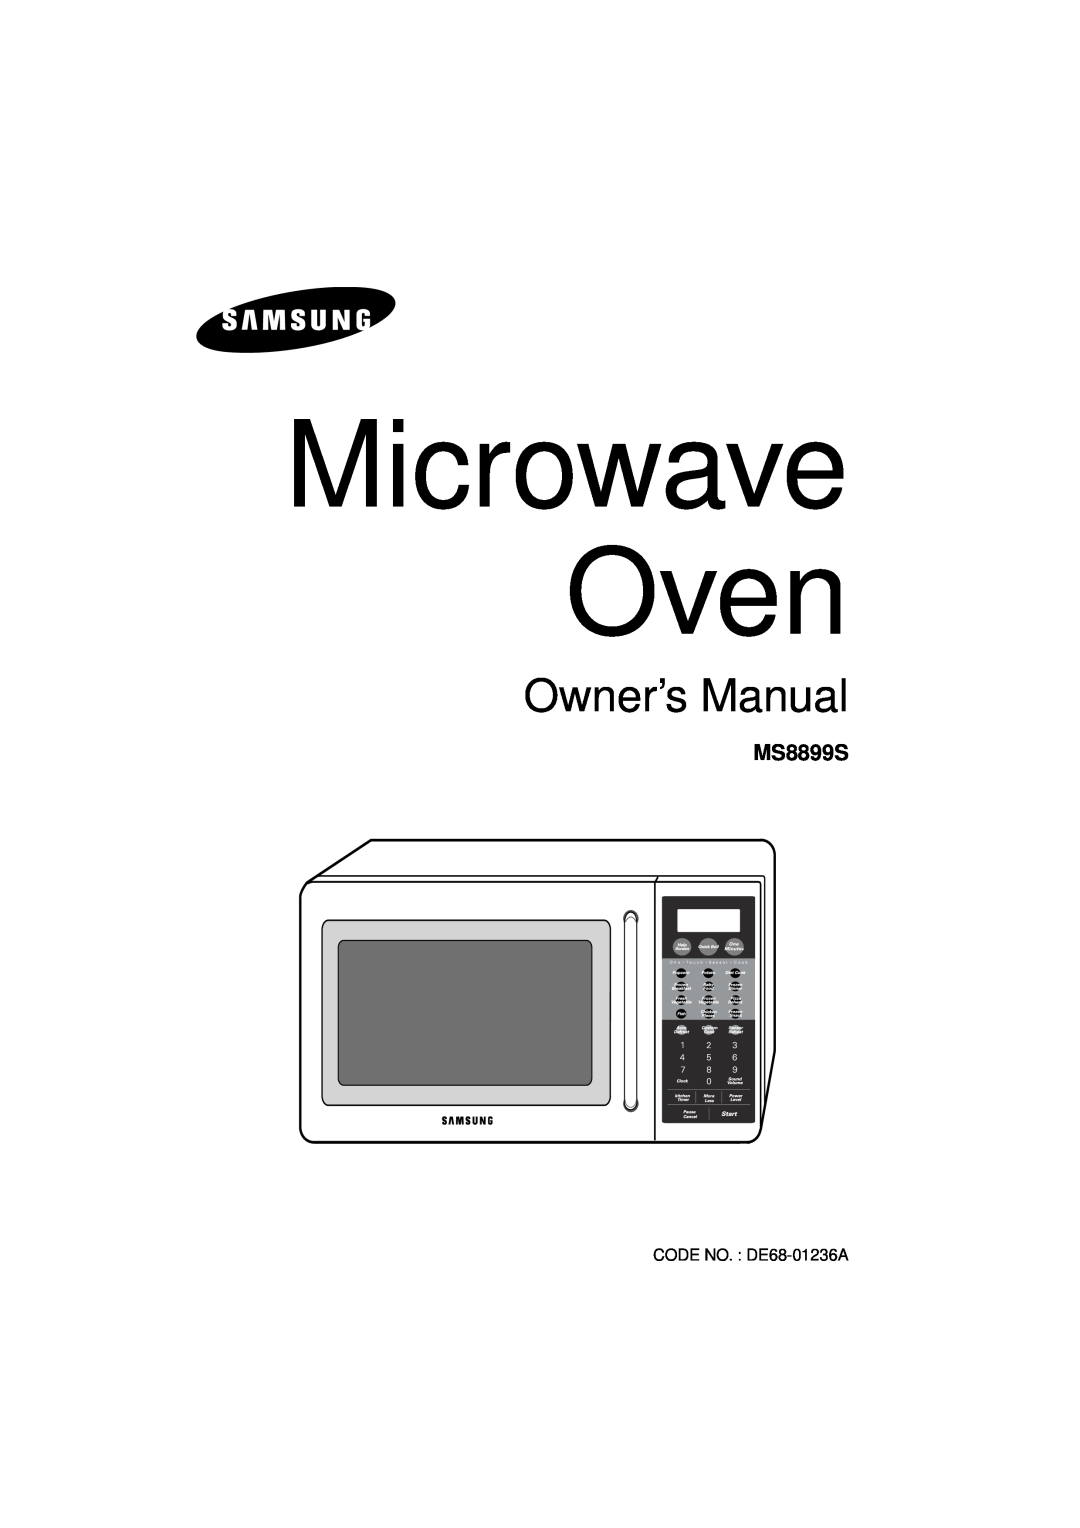 Samsung MS8899S manual Microwave Oven, Owner’s Manual, CODE NO. DE68-01236A 